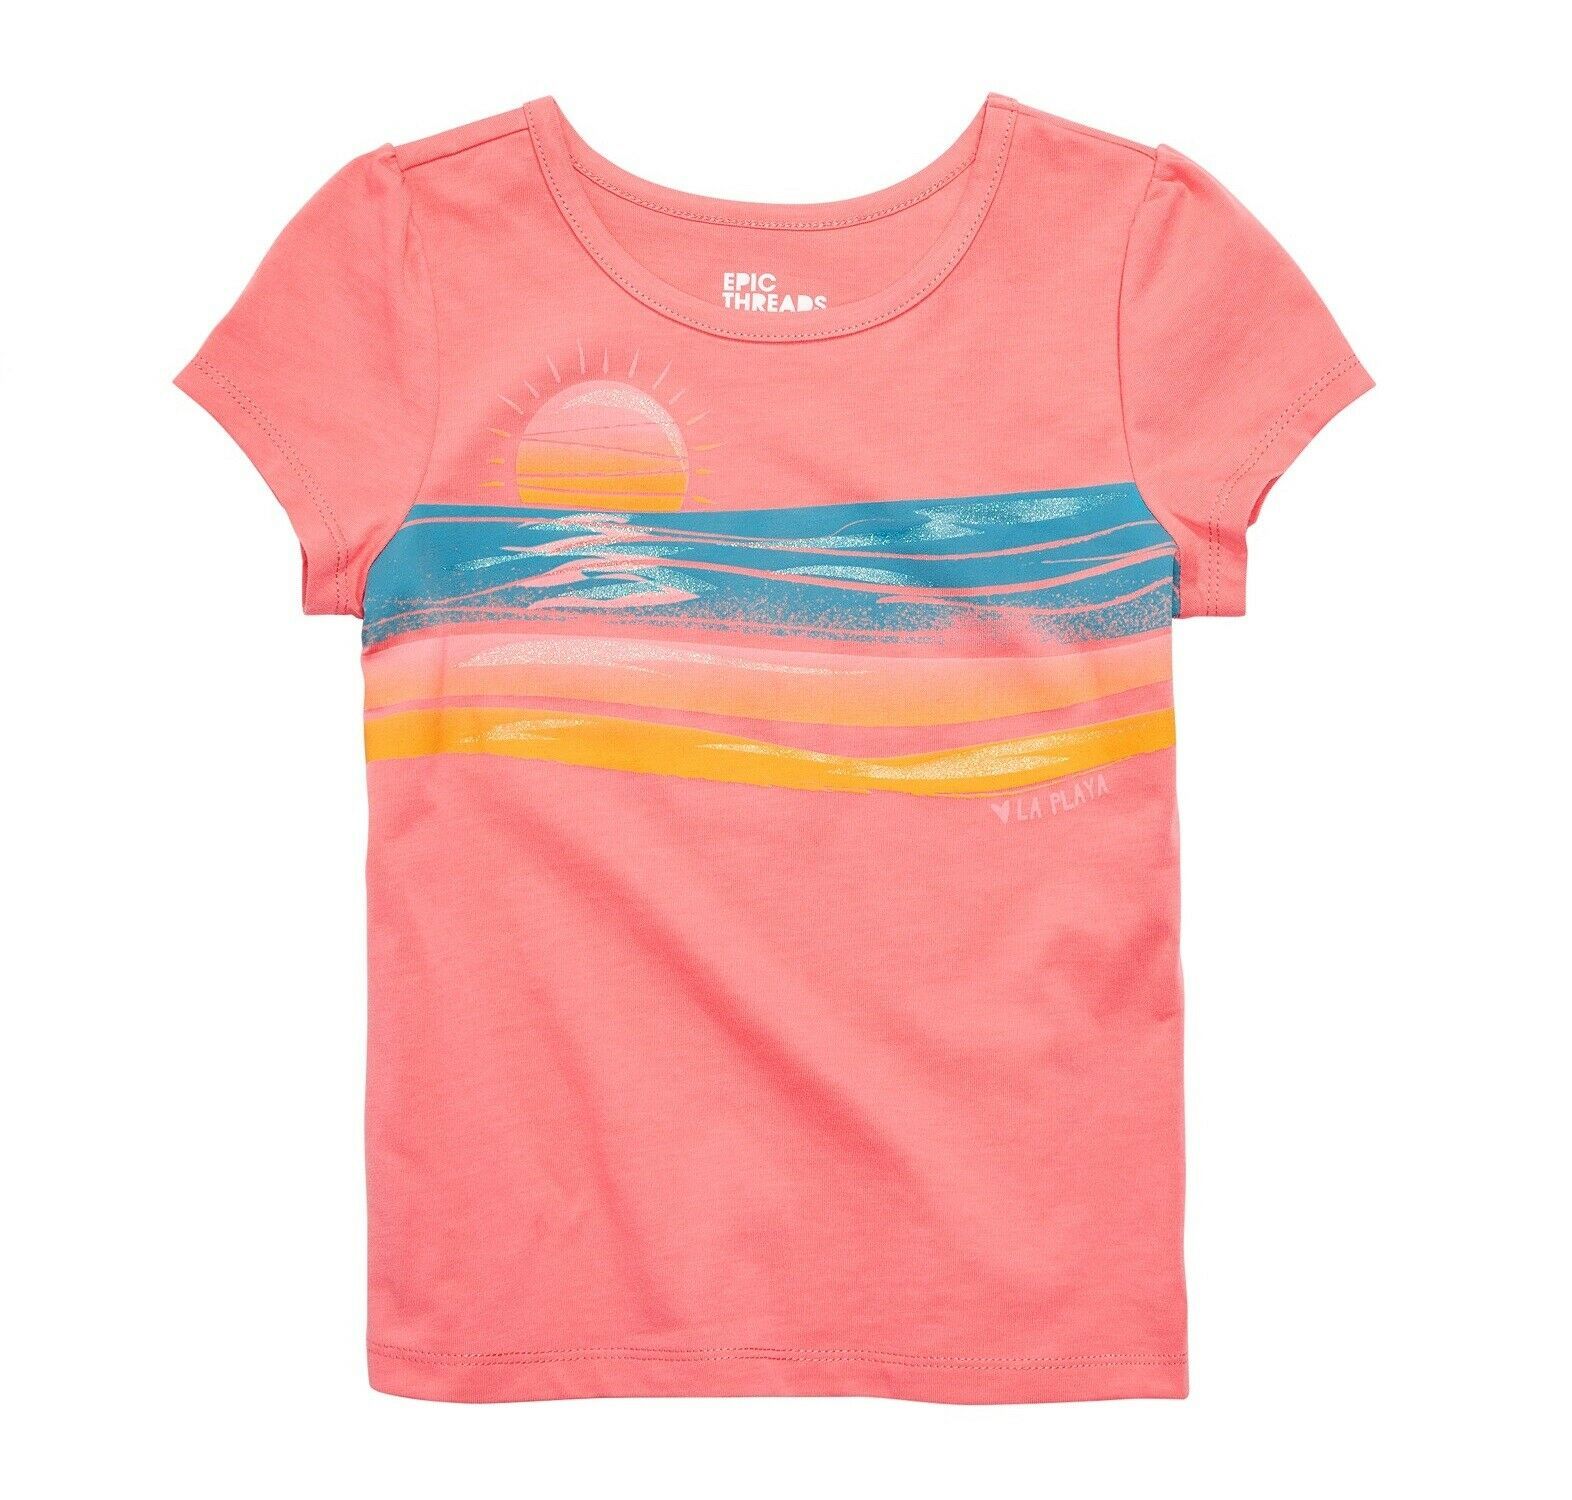 Primary image for Epic Threads Toddler Girls 2T Coral Shells Pink Sunset Print TShirt Top NWT